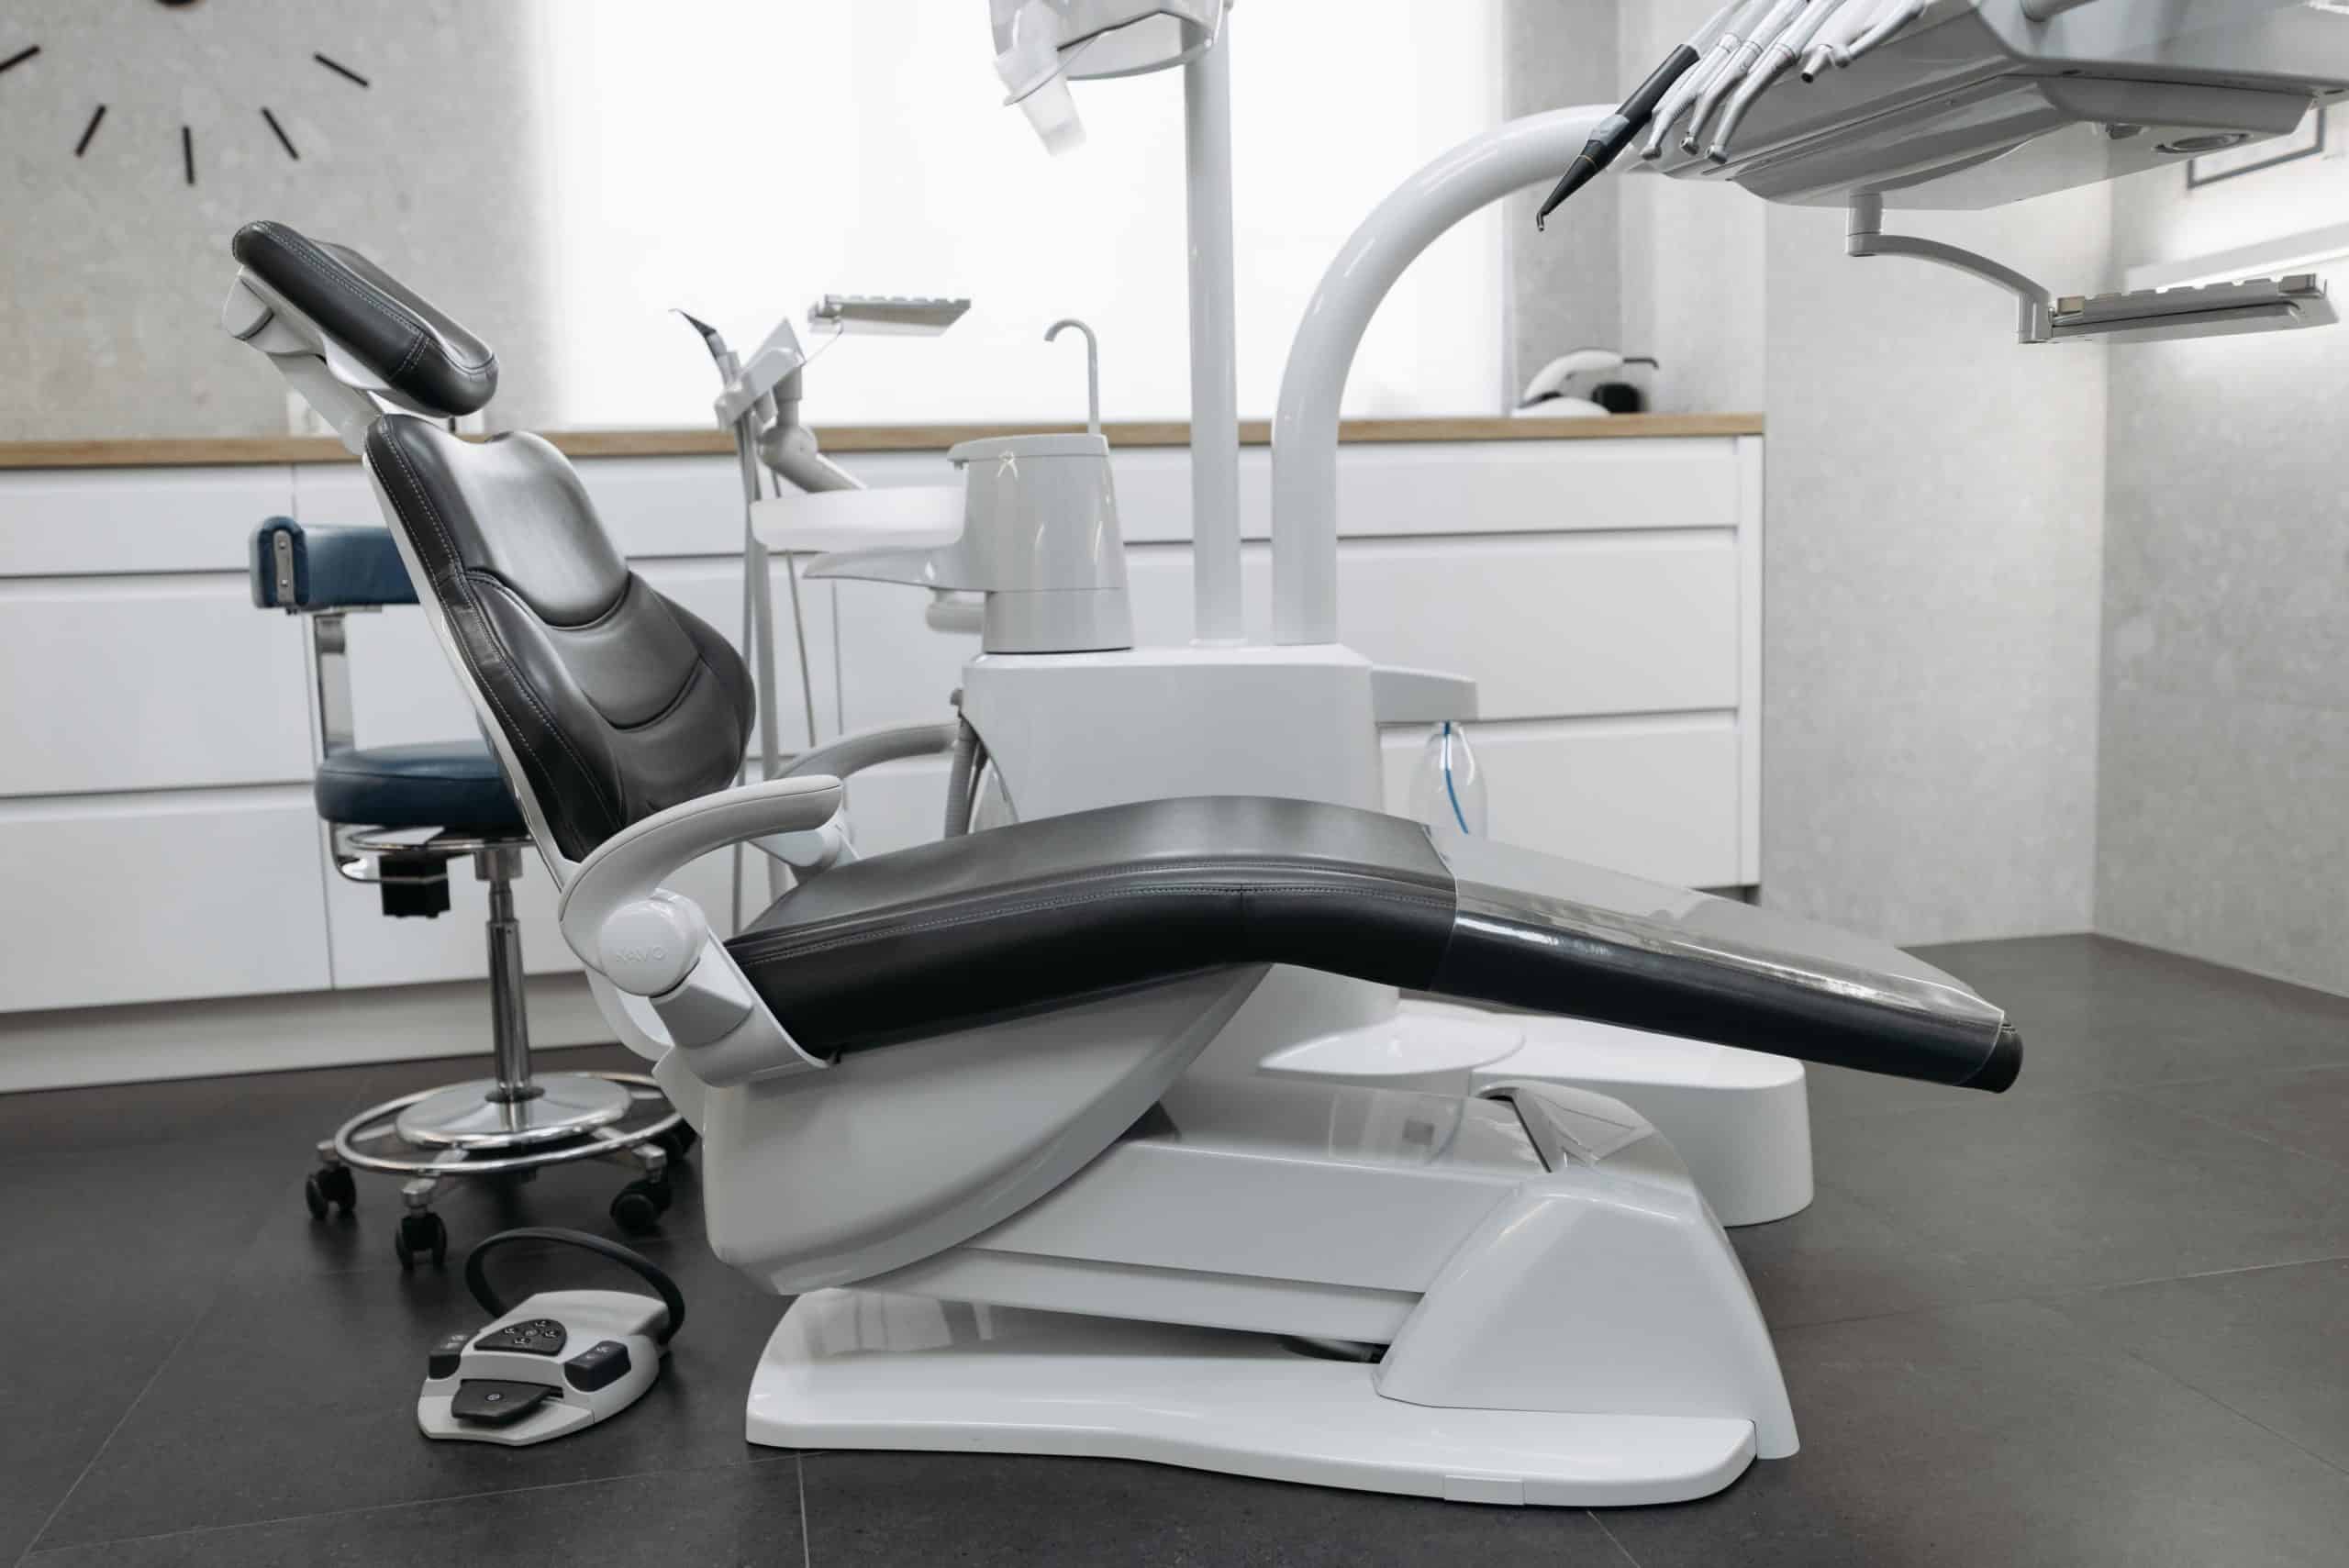 Dental chair in office representing an employment contract being invalid for employee